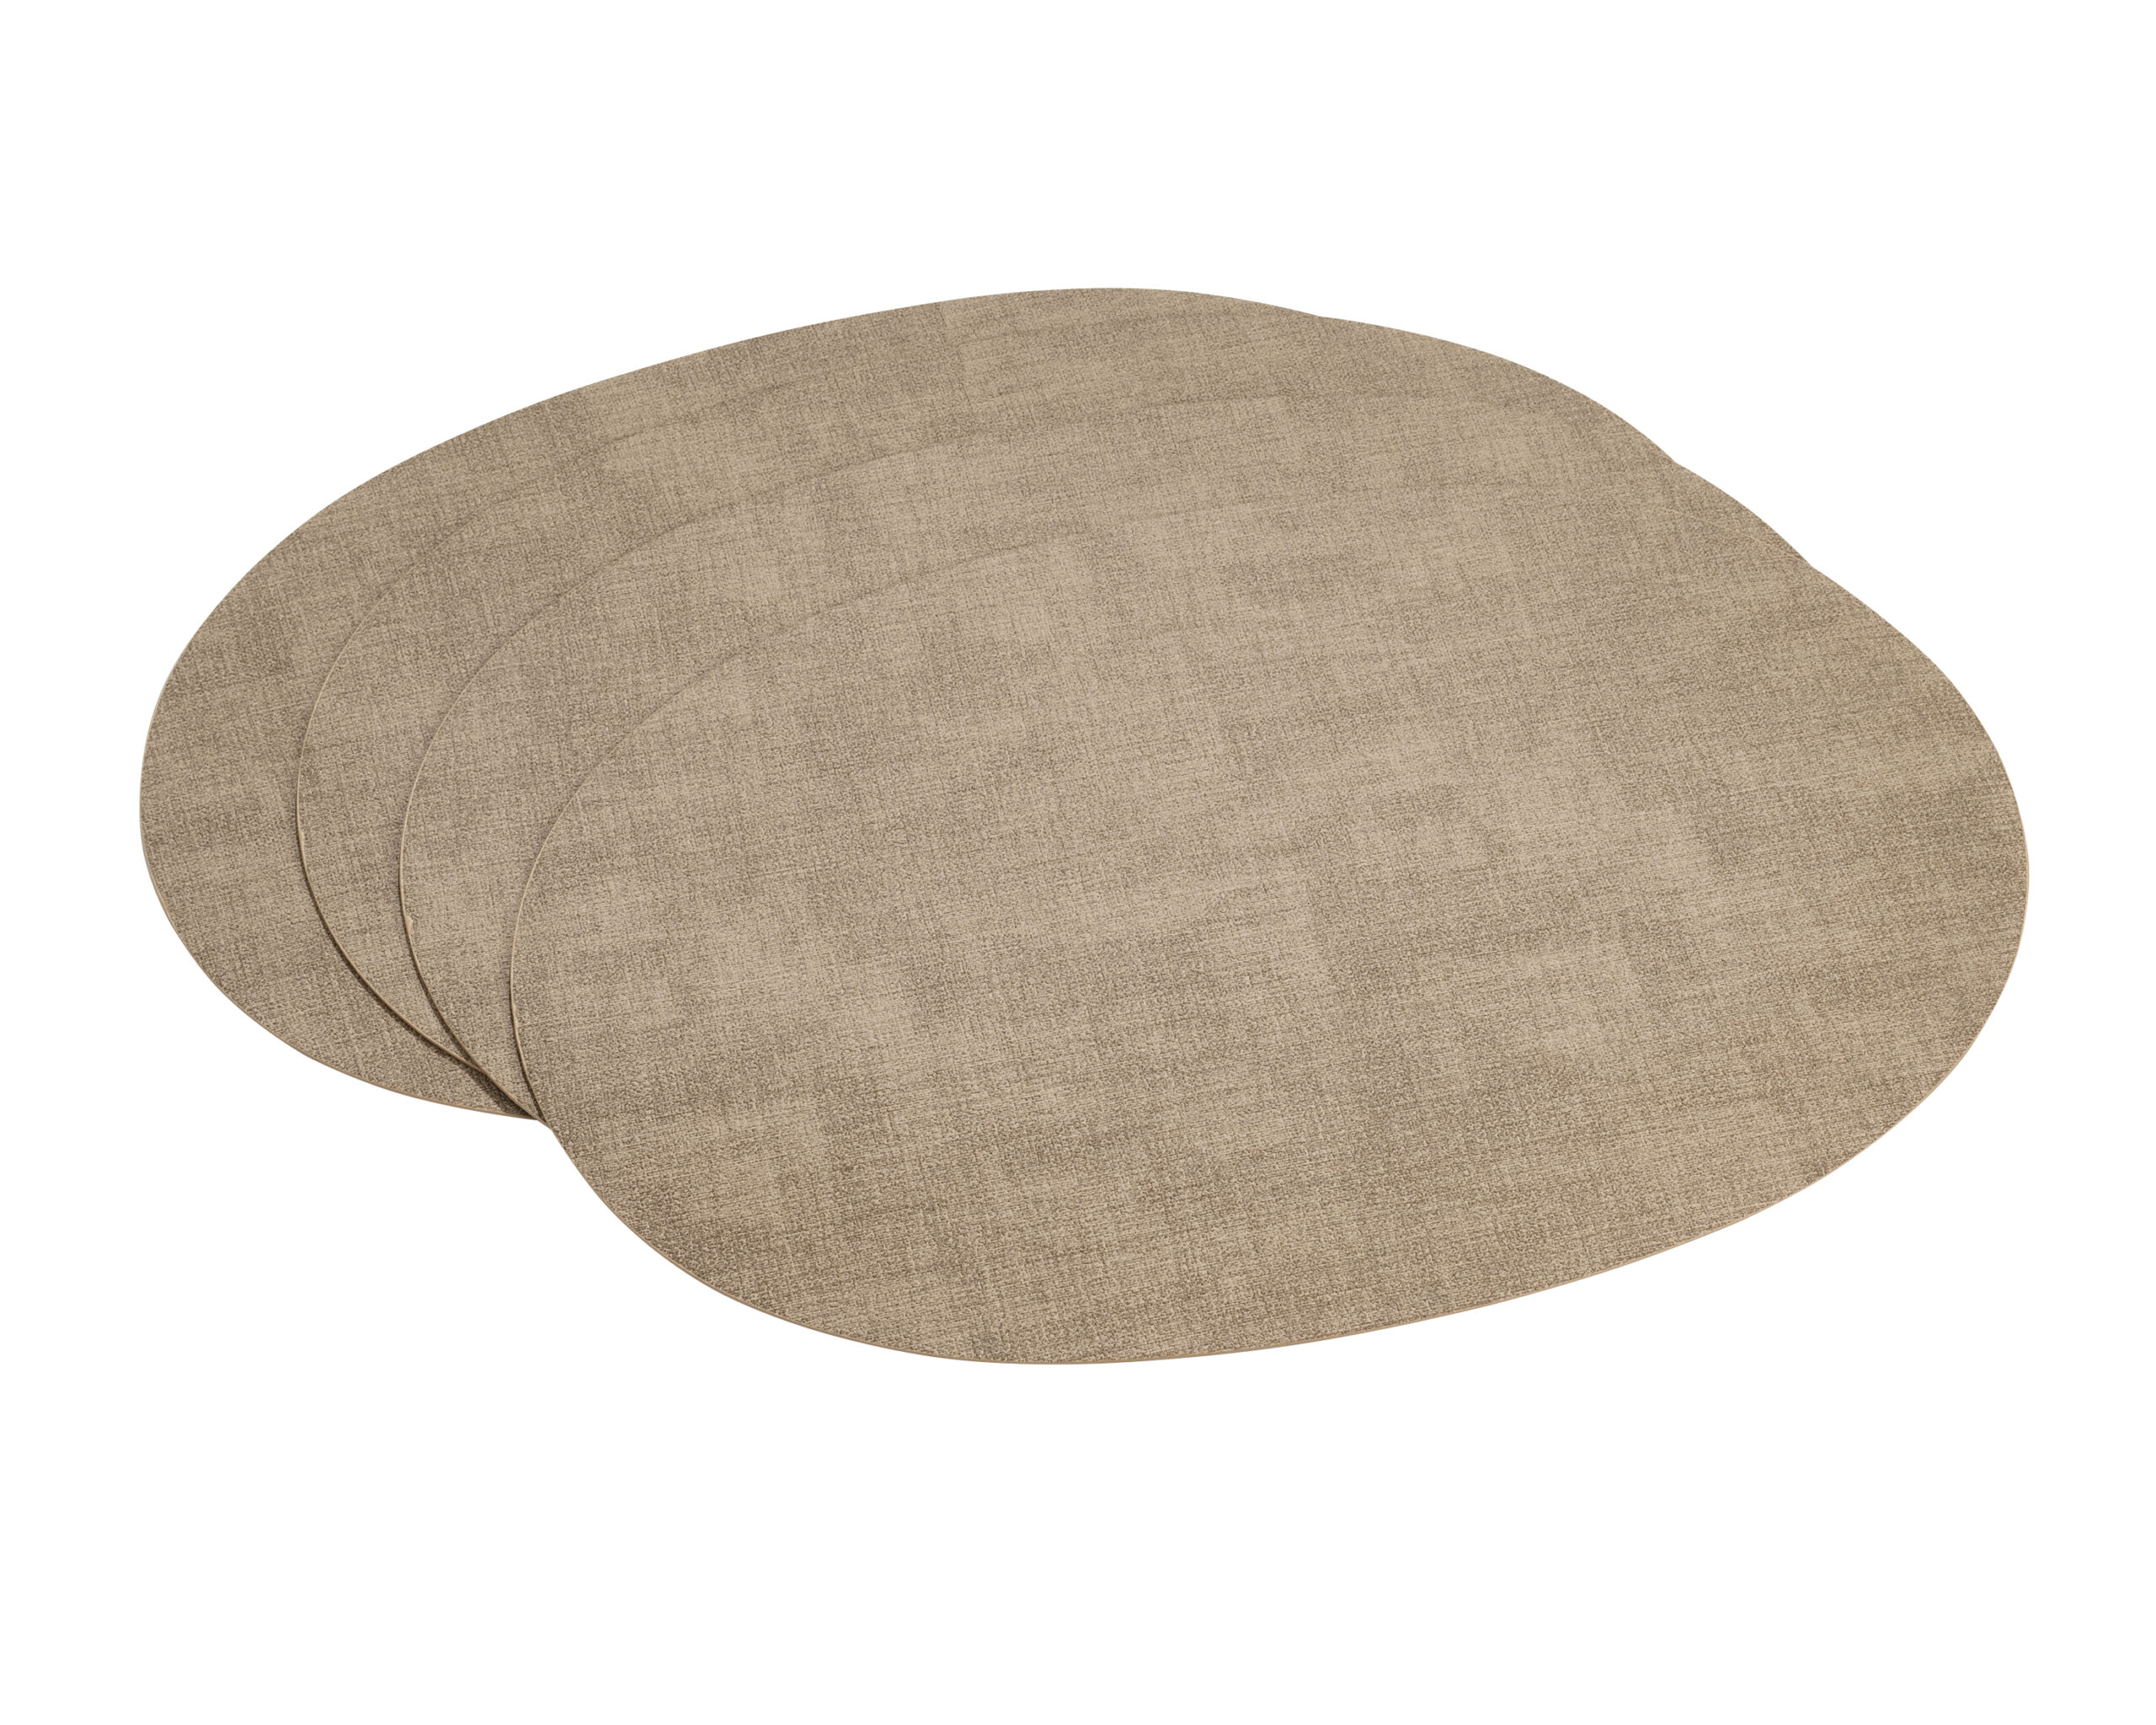 Placemat Vegan Leather - Ovaal 48x 32 - Lichtbruin